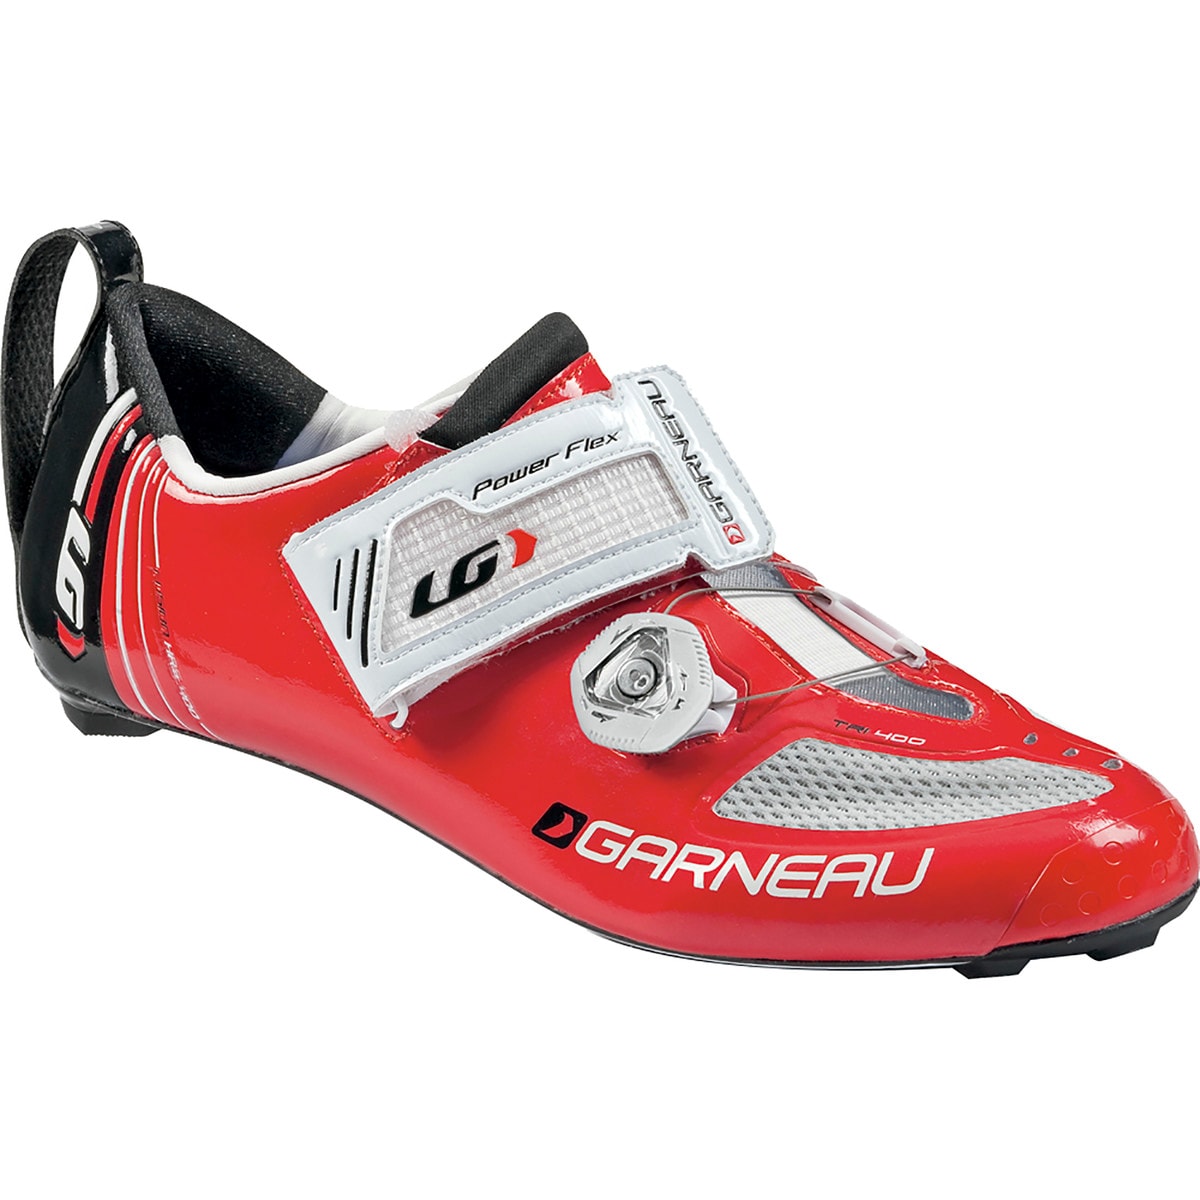 The Cycling Shoes' Buyers' Guide from Garneau